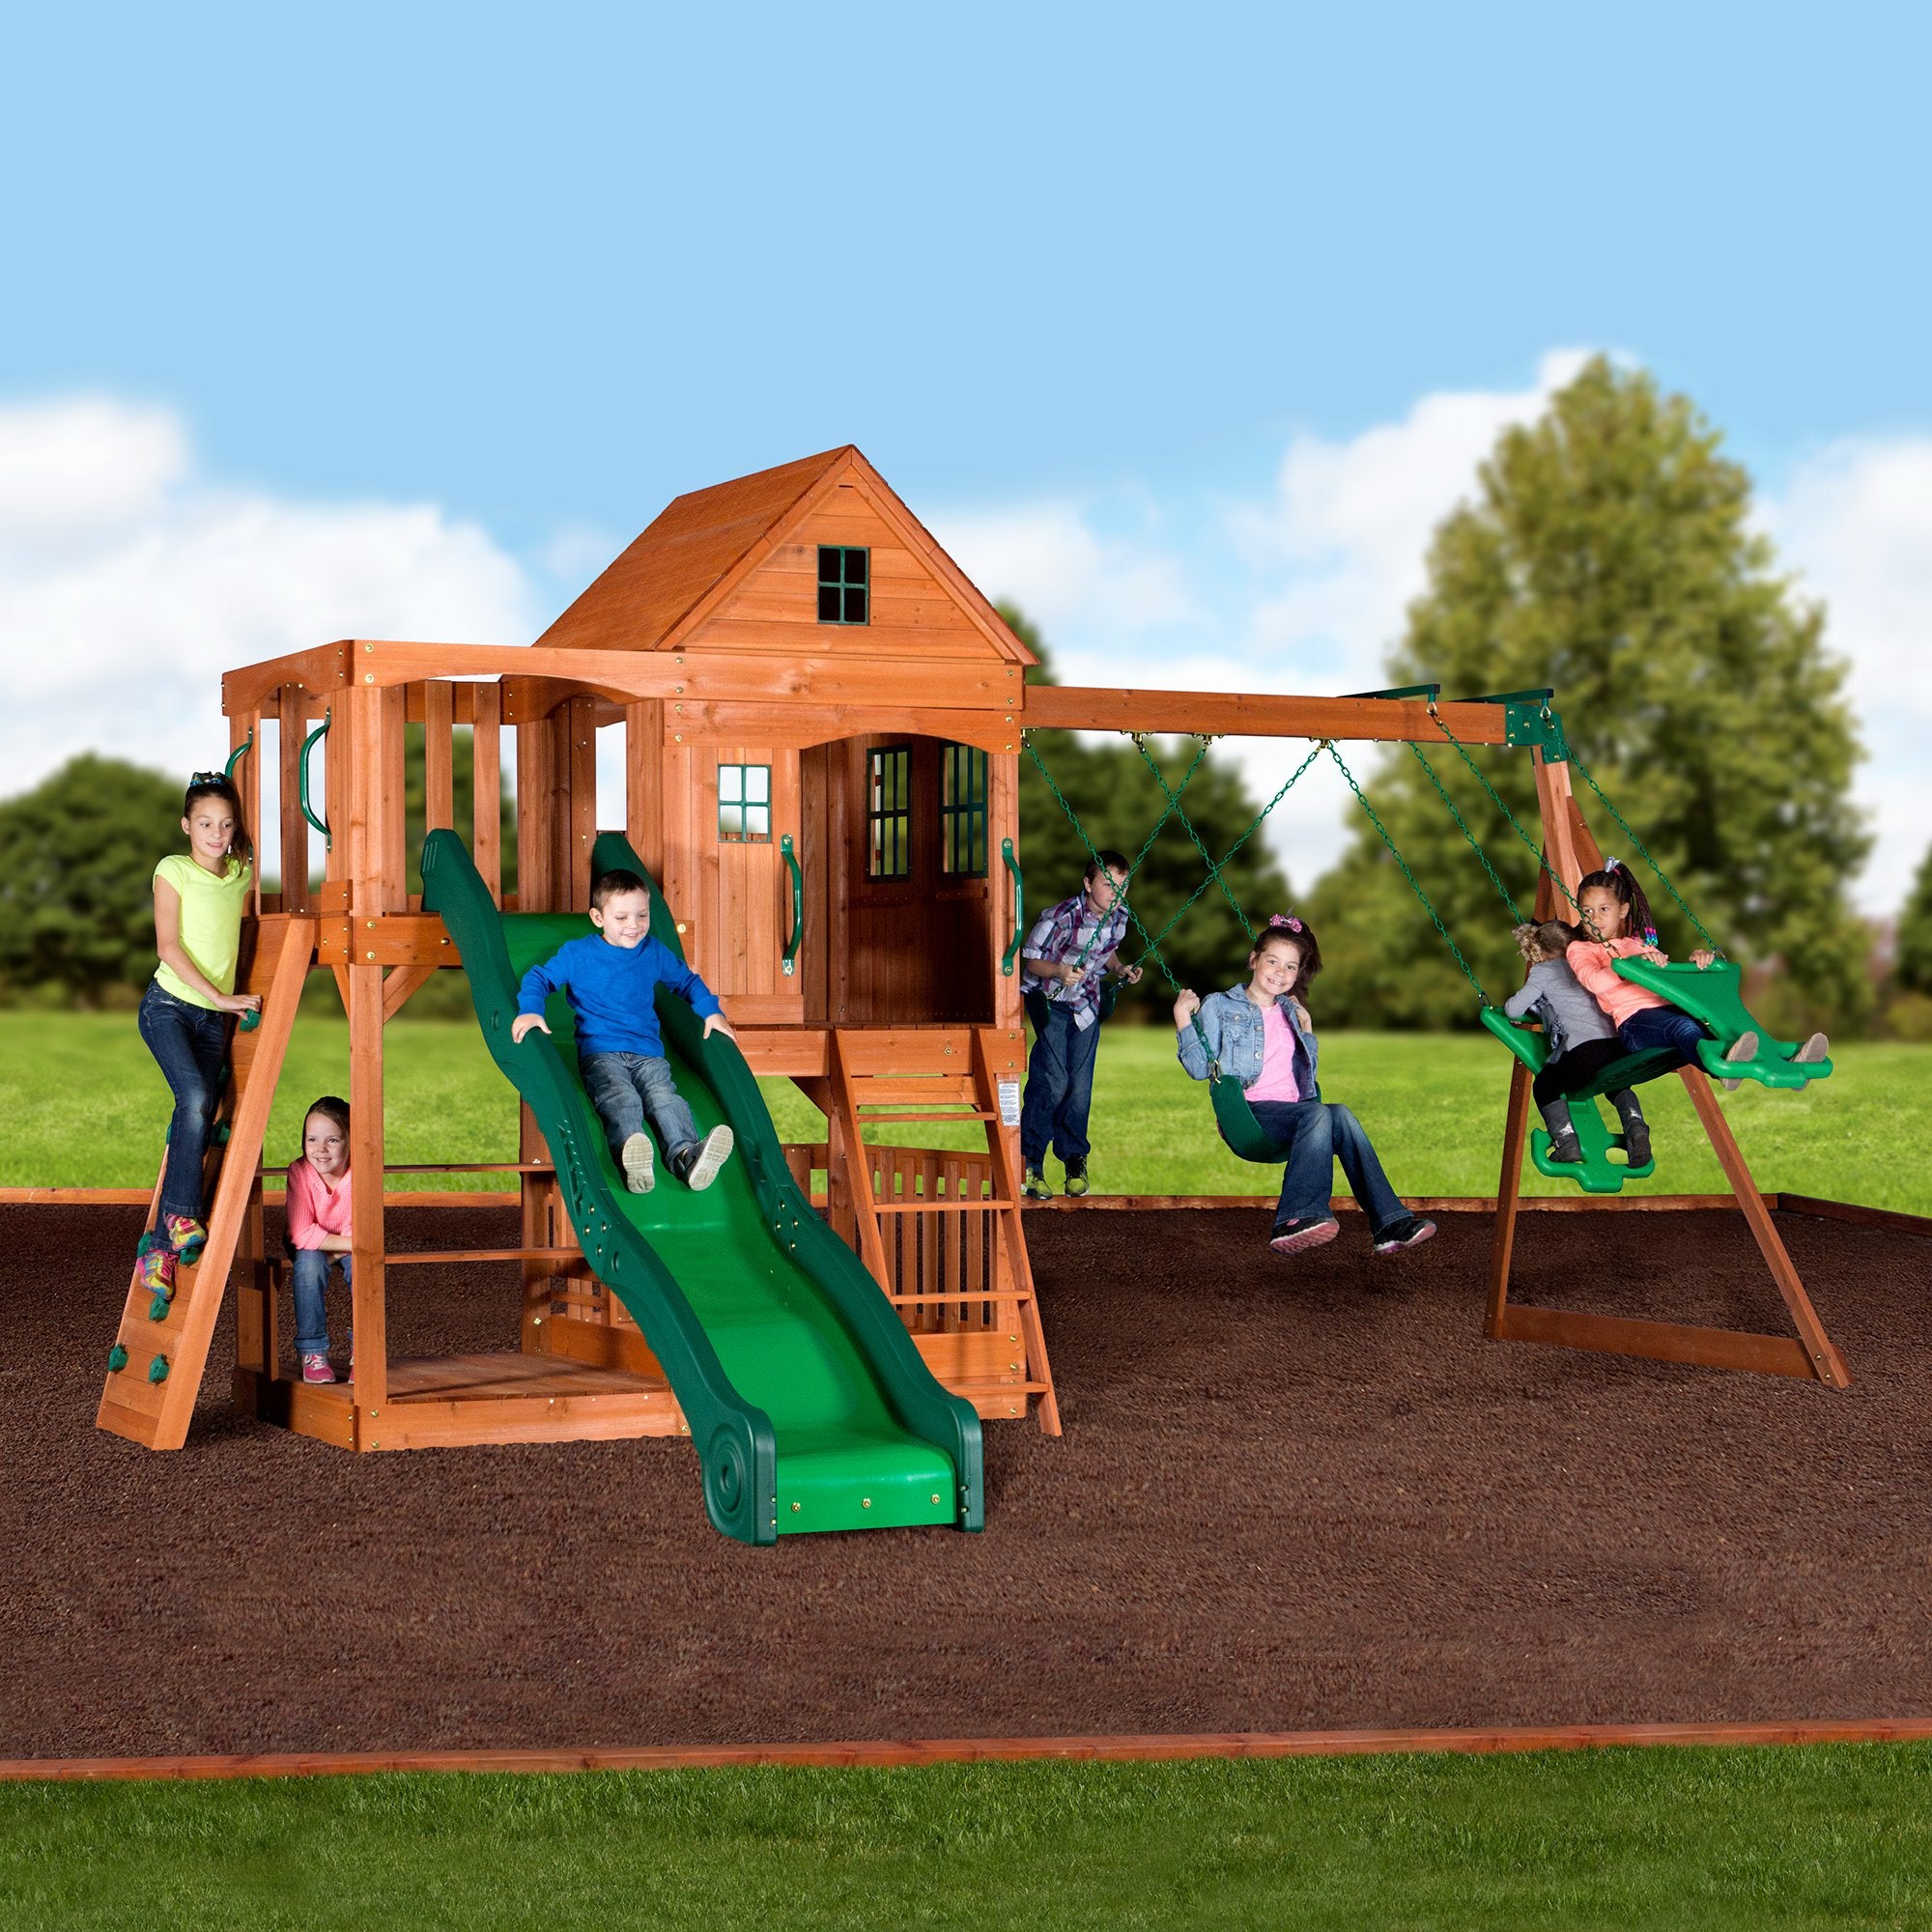 Premium Playsets in Arkansas - Best Choice for Home Playground Sets